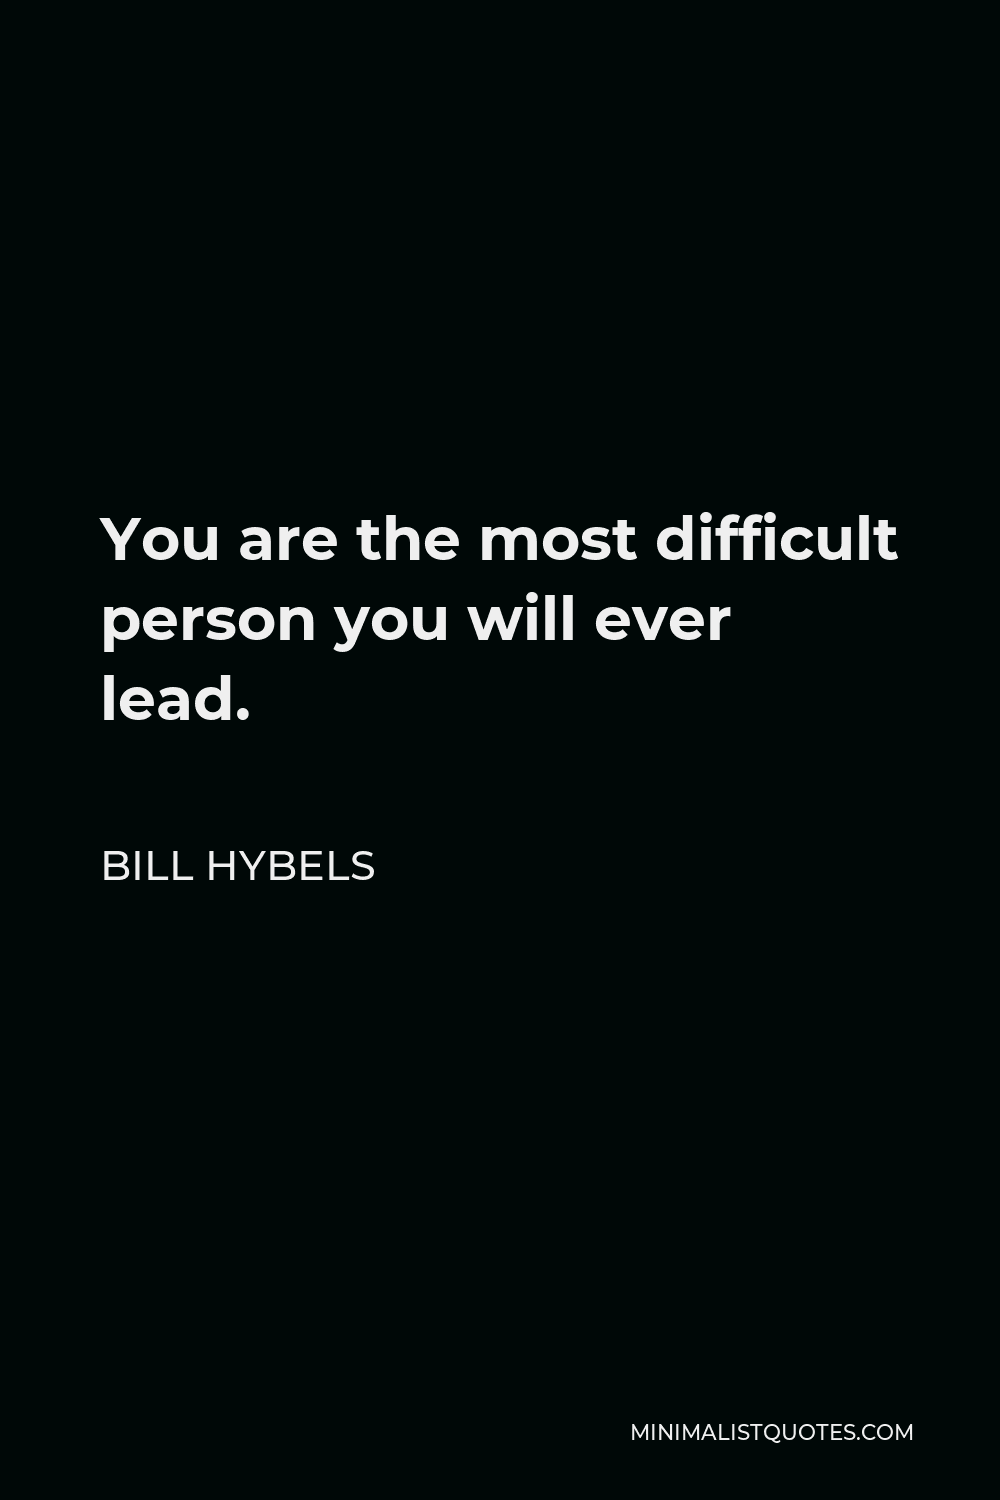 Bill Hybels Quote - You are the most difficult person you will ever lead.